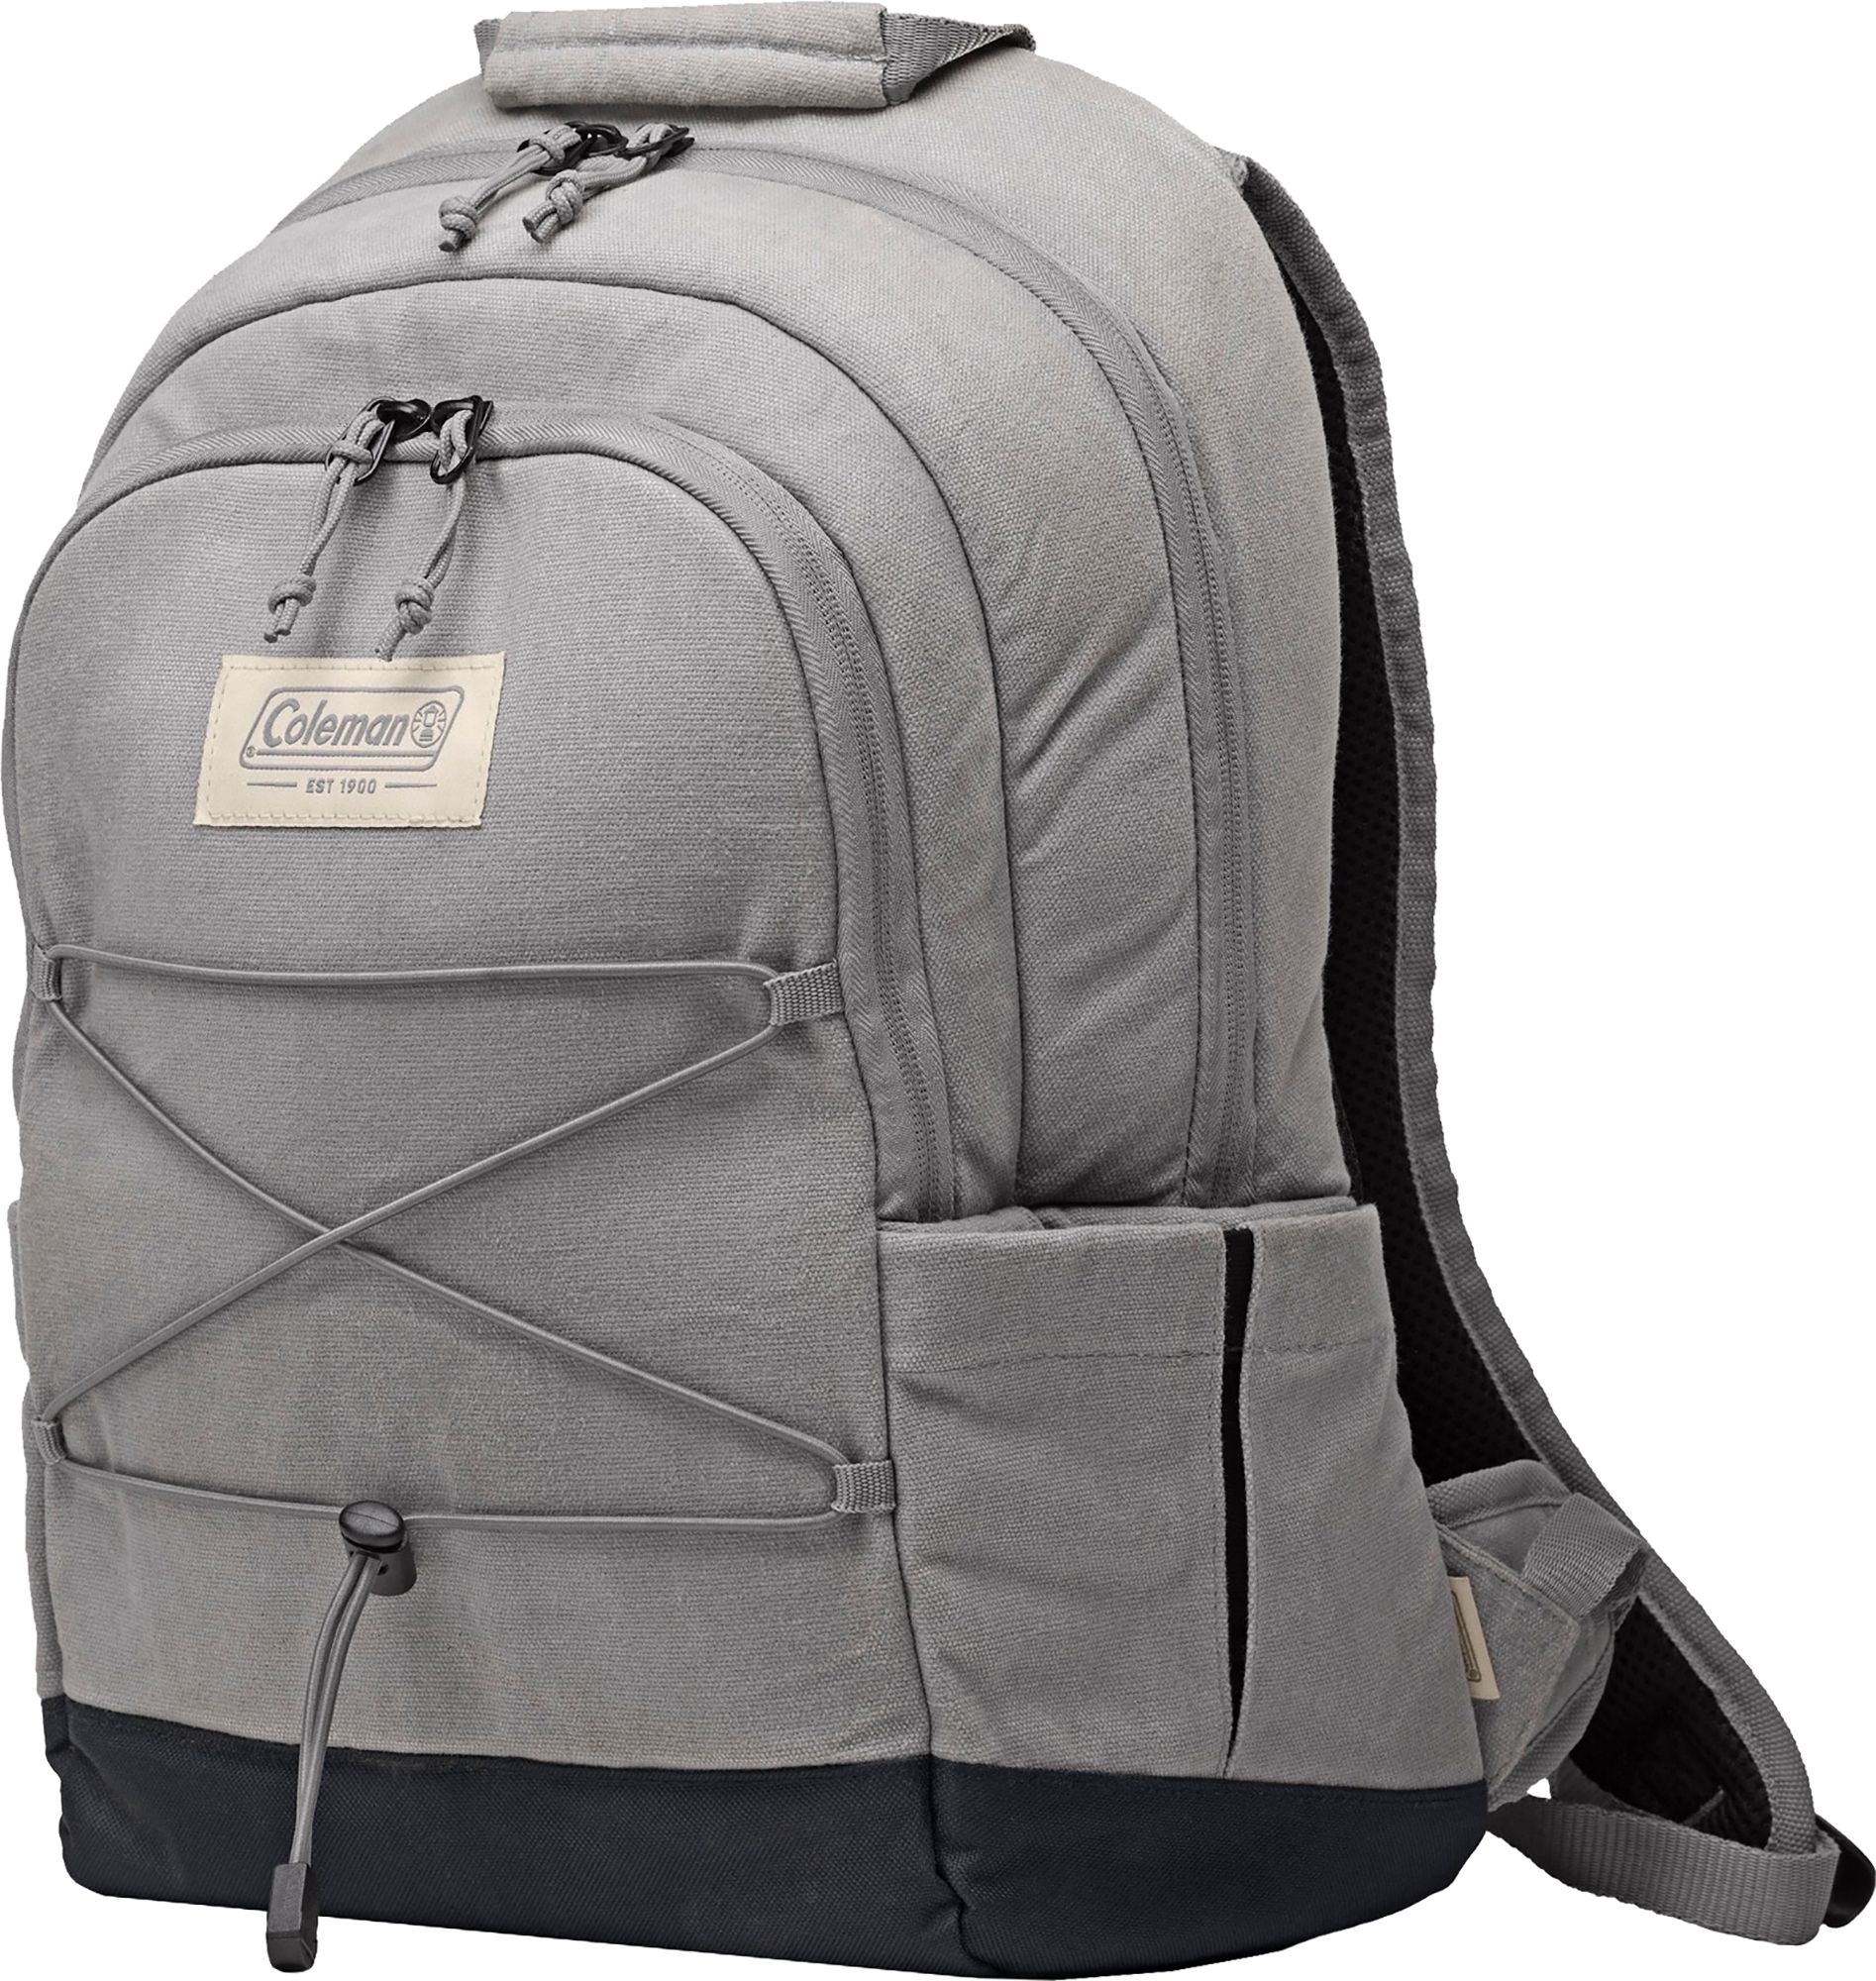 Coleman Backroads Insulated 30-Can Soft Cooler Backpack